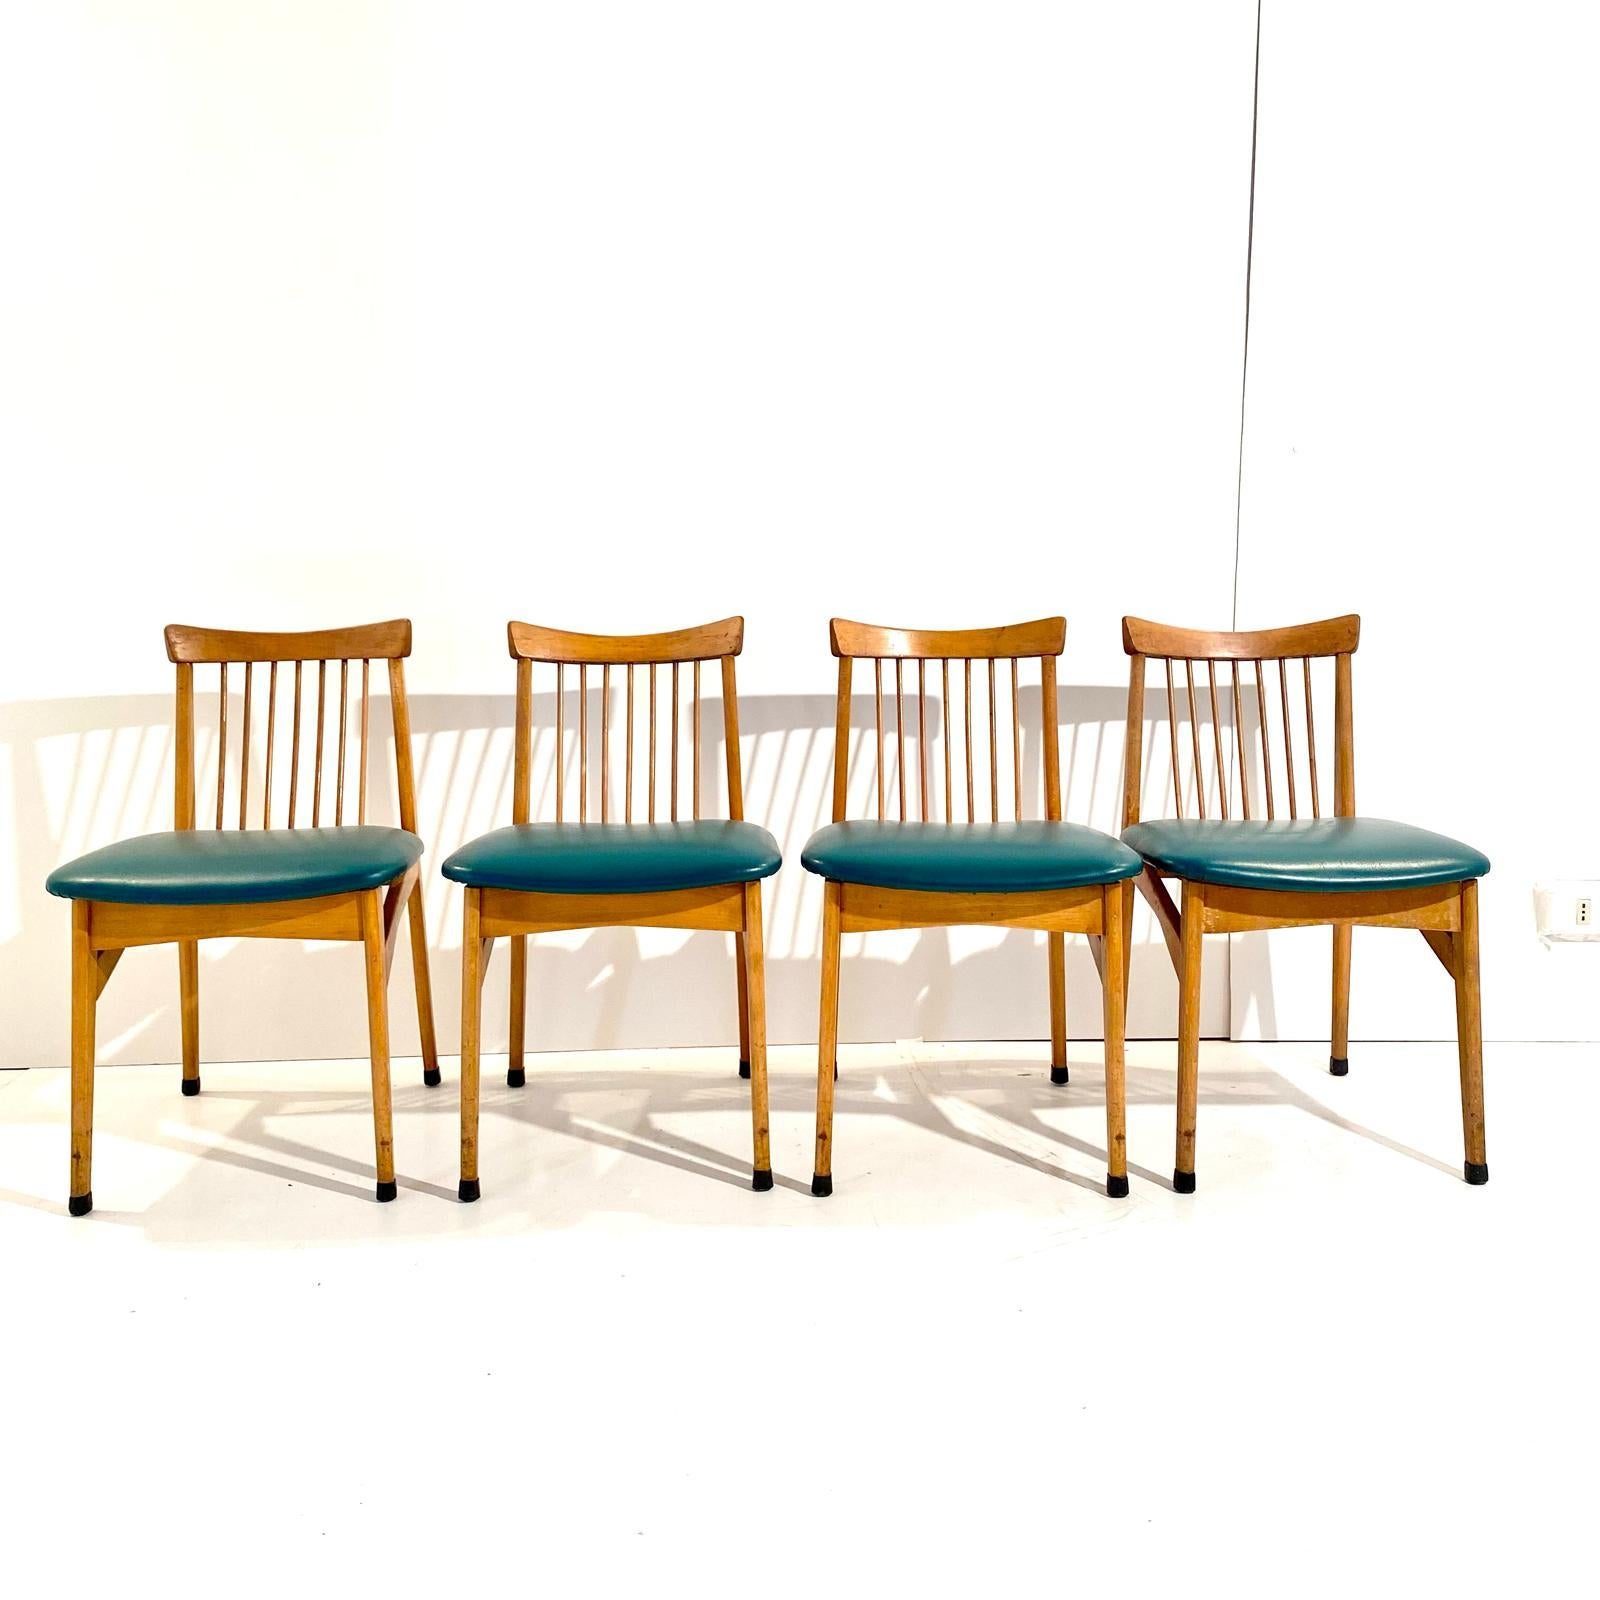 Vintage wood dining chairs, set of four, Italy 1960s.
Set of four solid beech wood structure with beautiful back seat. Sturdy solid wood structure and original green faux leather. Manufactured in Italy in the 1960s. 

Wood has been traited and